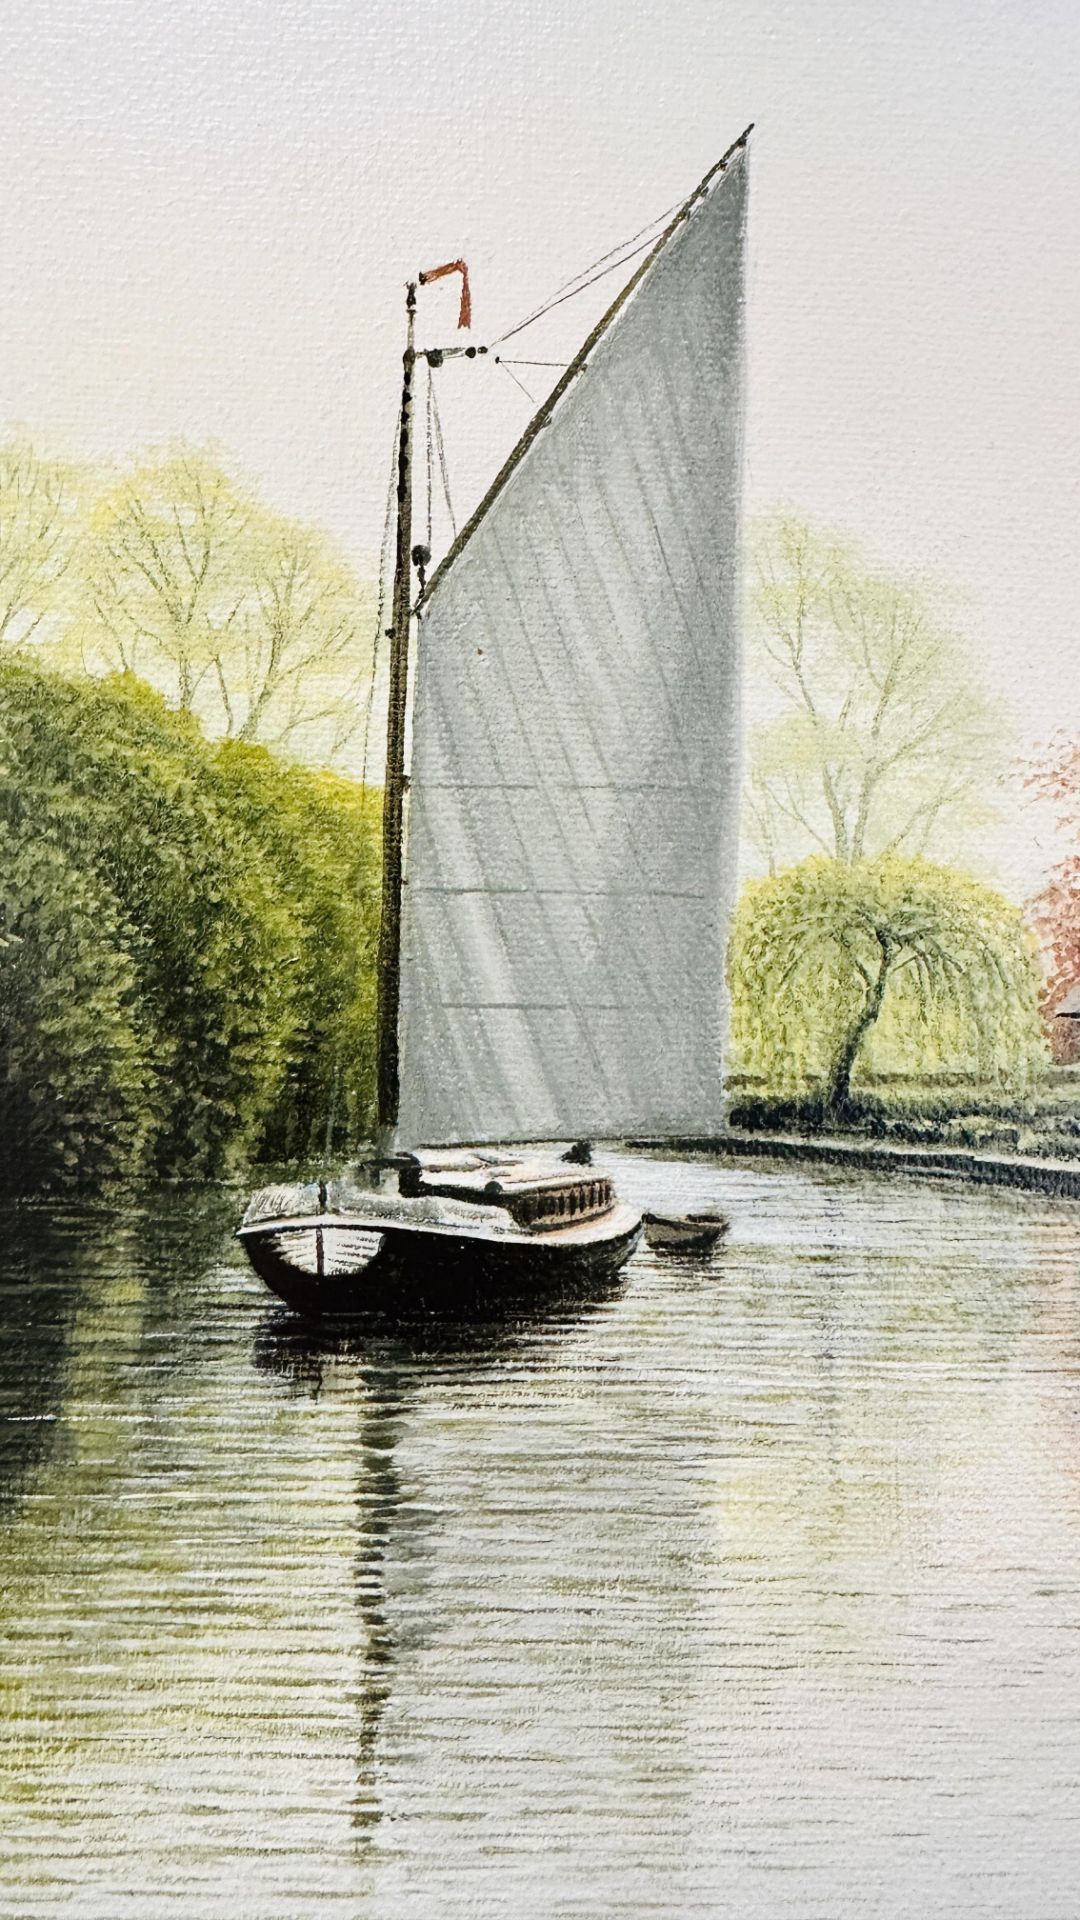 OIL ON CANVAS "SERENITY" WHERRY AT IRSTEAD BEARING SIGNATURE DAVID J. - Image 4 of 6